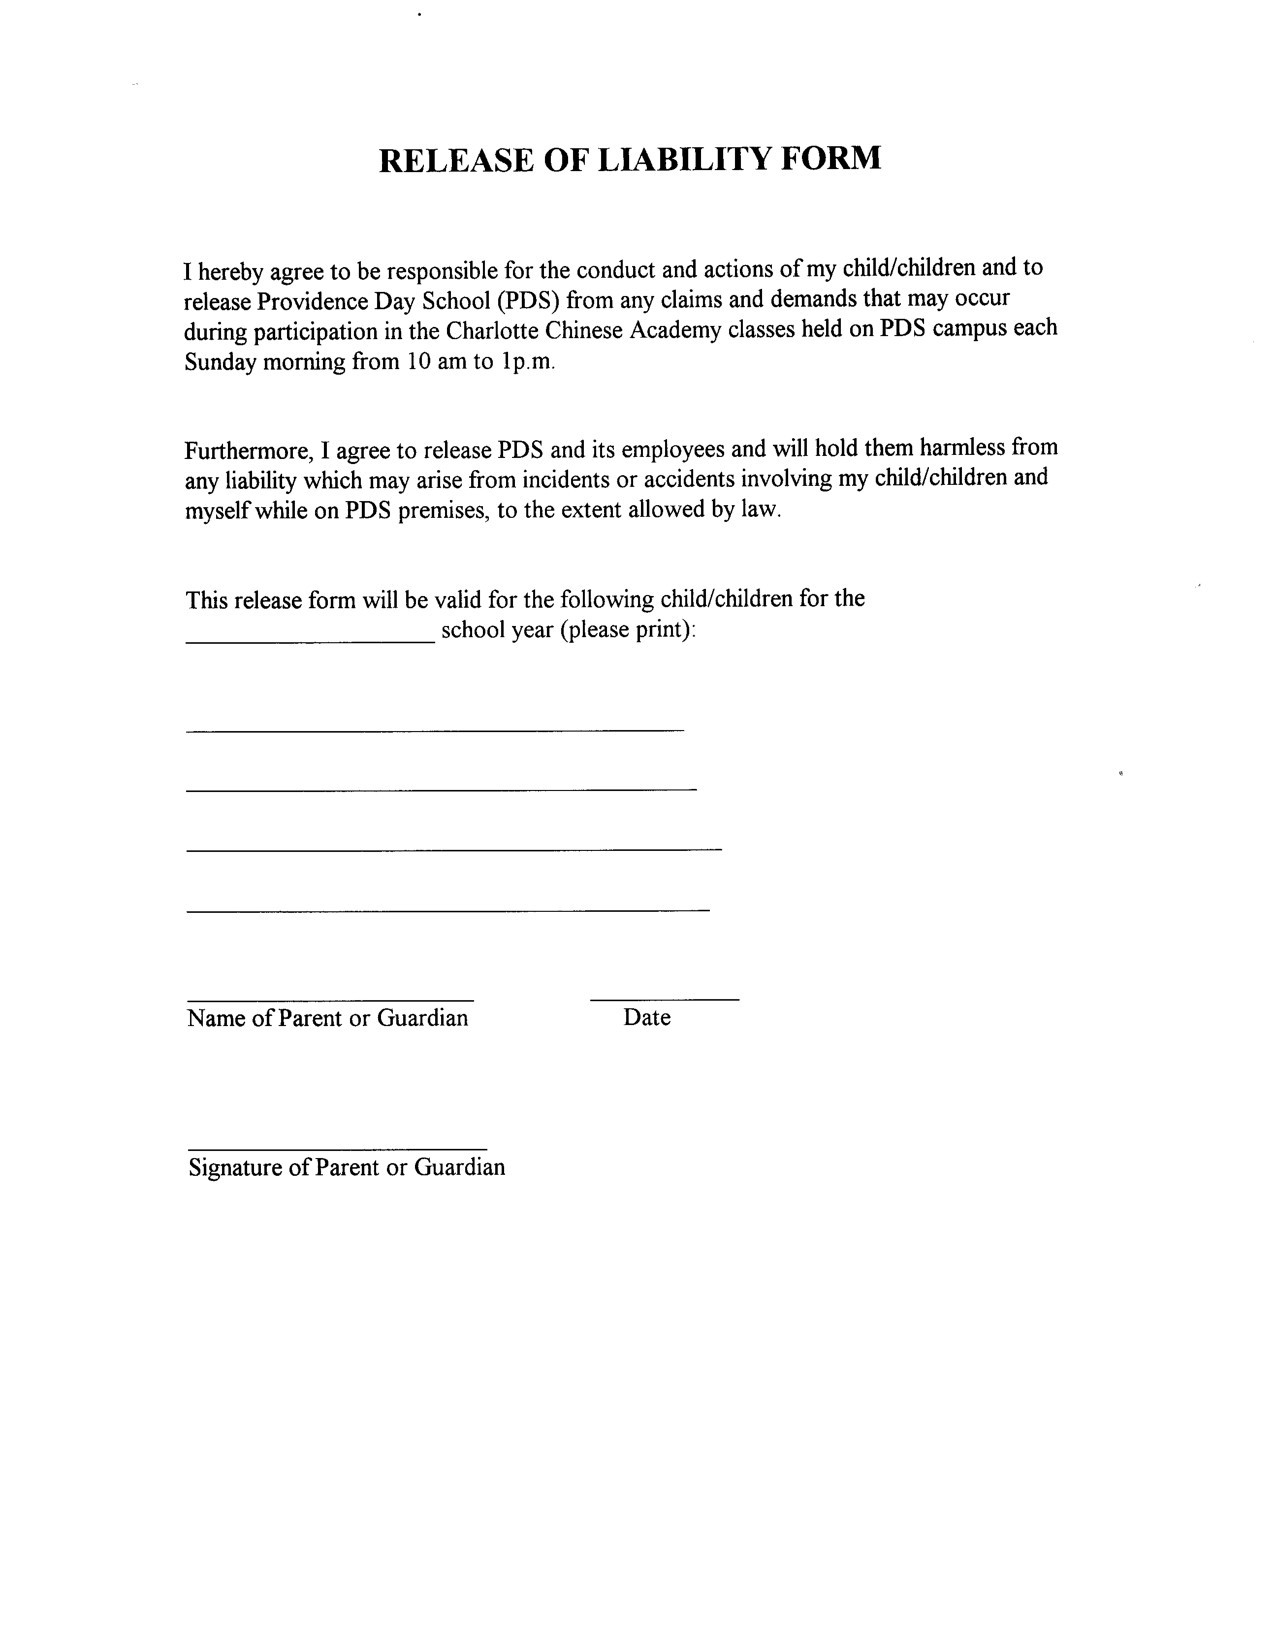 Waiver Letter Template - Sports Waiver form Beautiful Sample Waiver Letter Luxury Group Lots